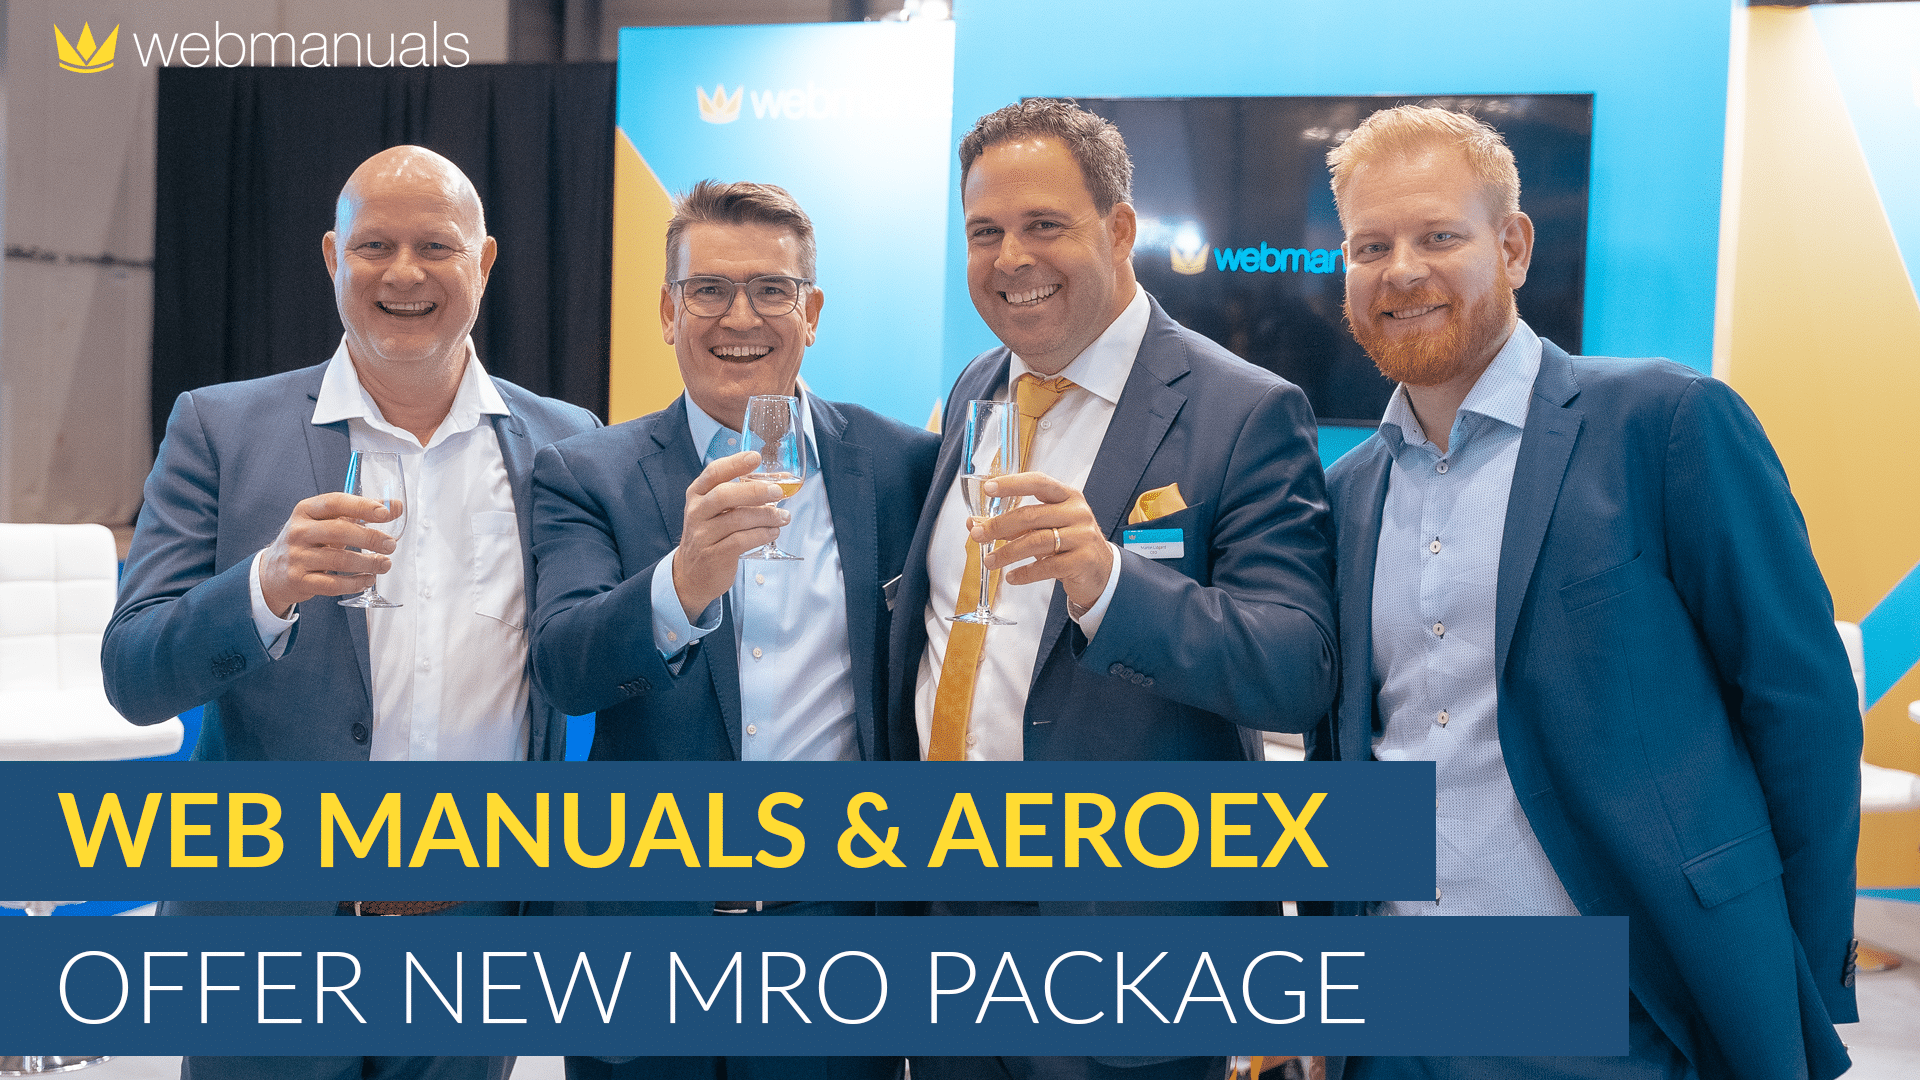 Martin Lidgard and Richard Sandström representing the document management system Web Manuals built for aviation together with representatives from AeroEx join forces together